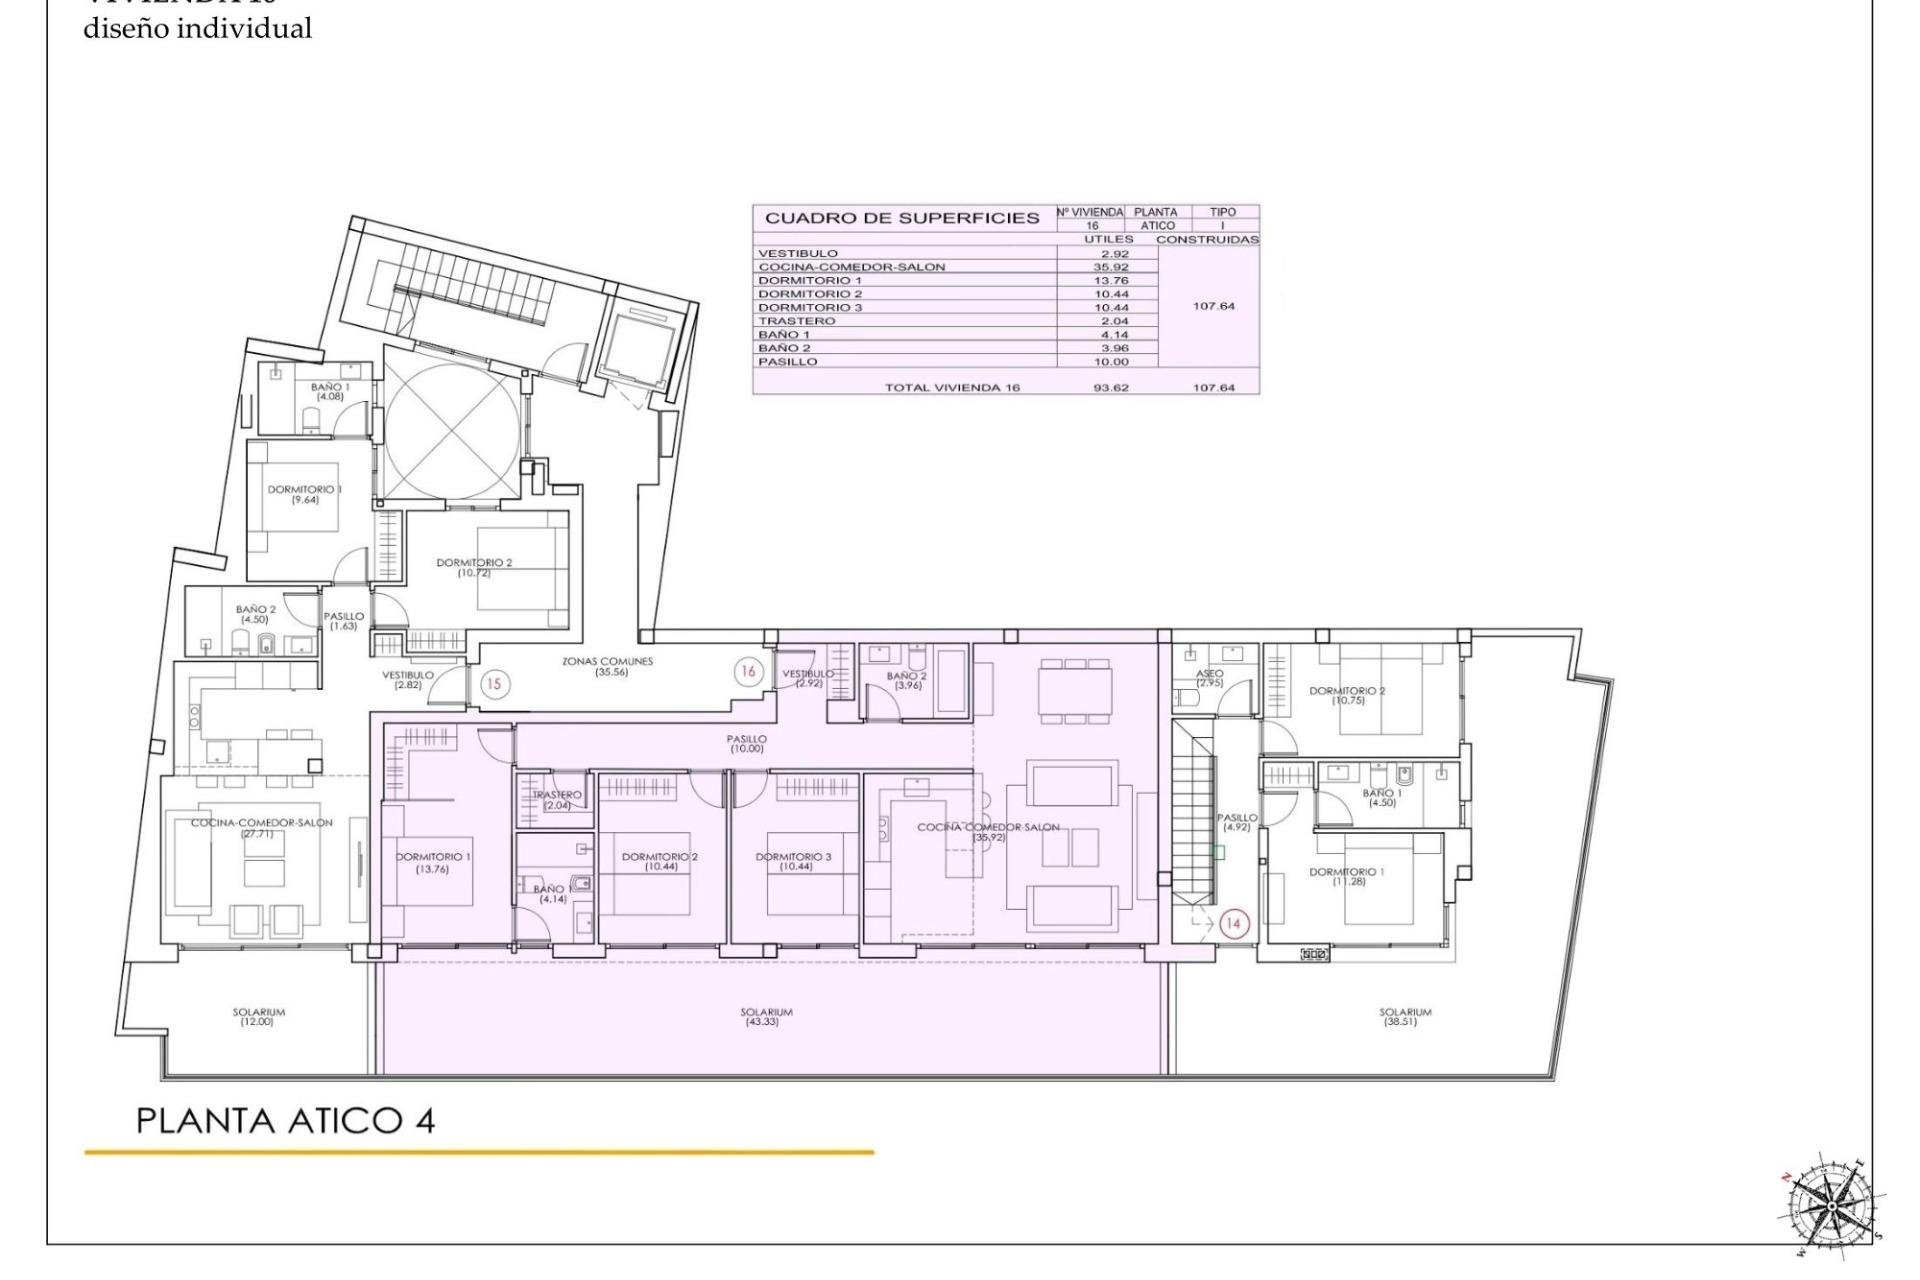 New Build - Penthouse -
Torrevieja - Playa del Cura